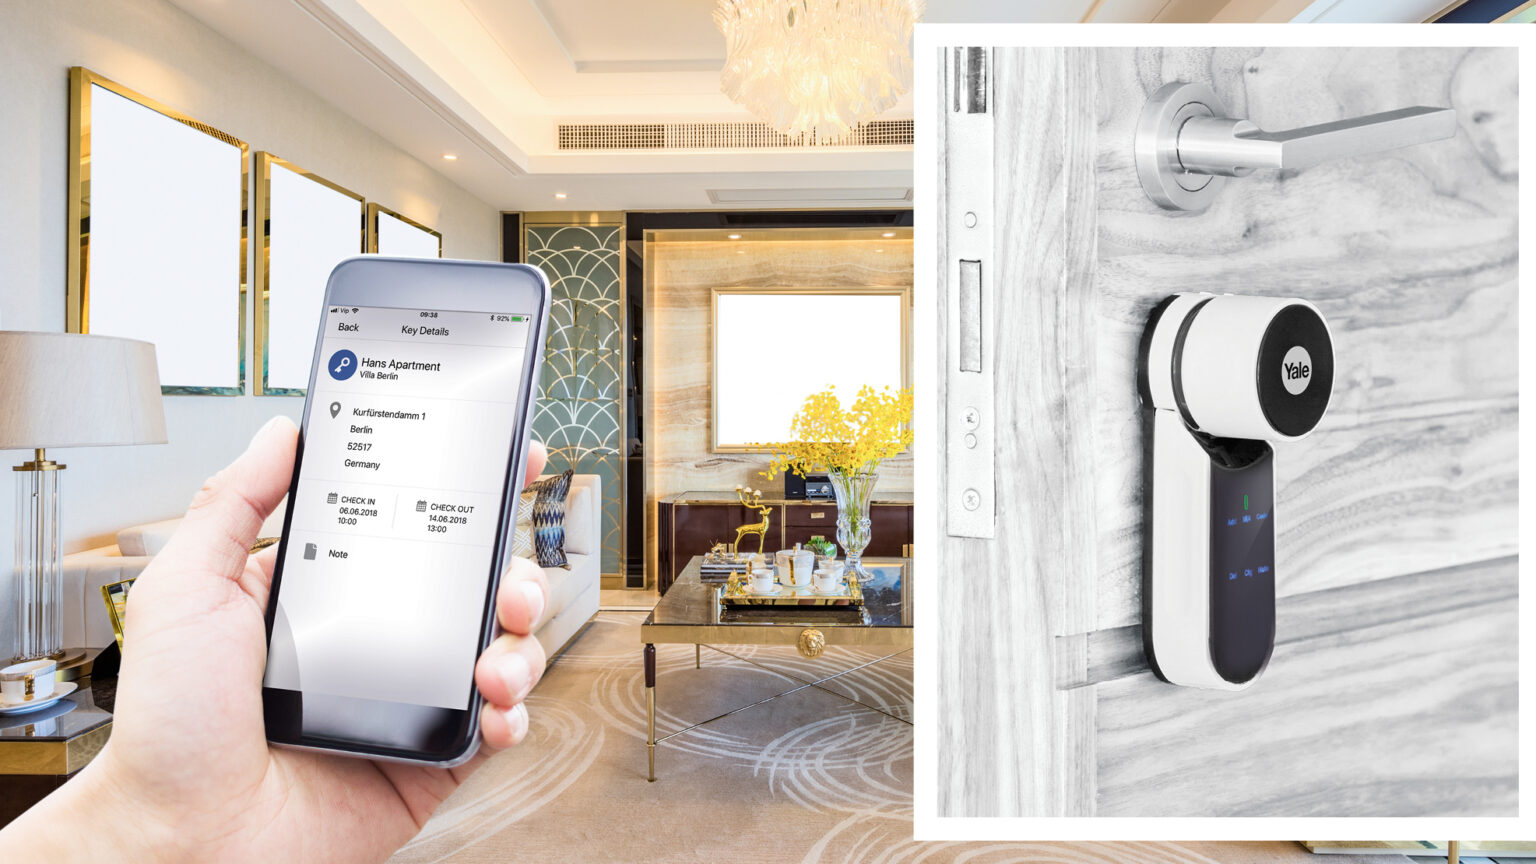 More European property rental services are relying on secure solutions around the ENTR smart door lock. Image: ASSA ABLOY/Intersoft/iStock.